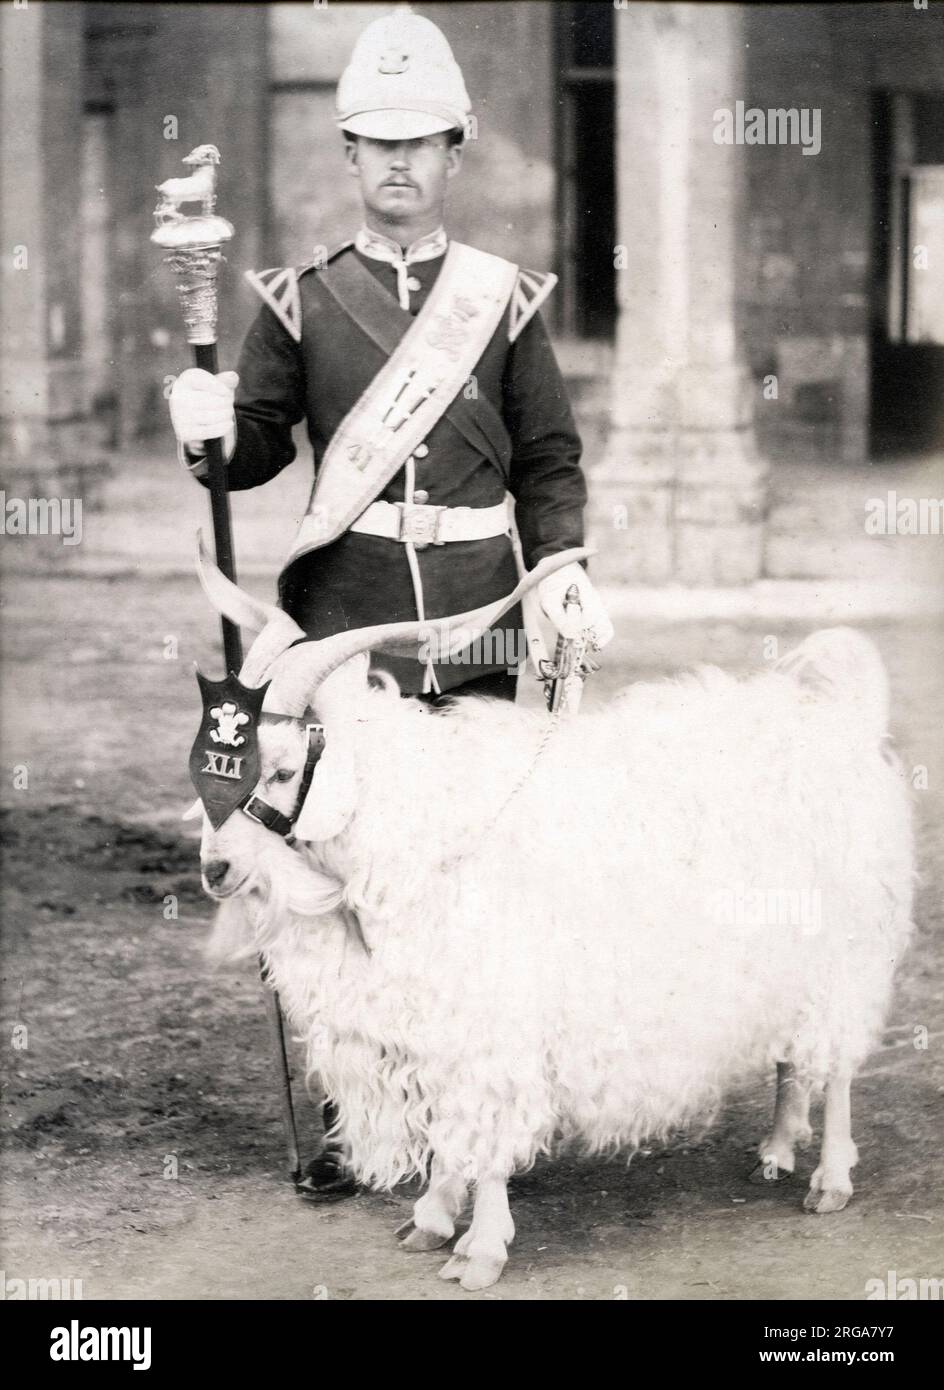 Billy goat mascot of the 41st Regiment of Foot in the British army.. Vintage 19th century photograph. Stock Photo